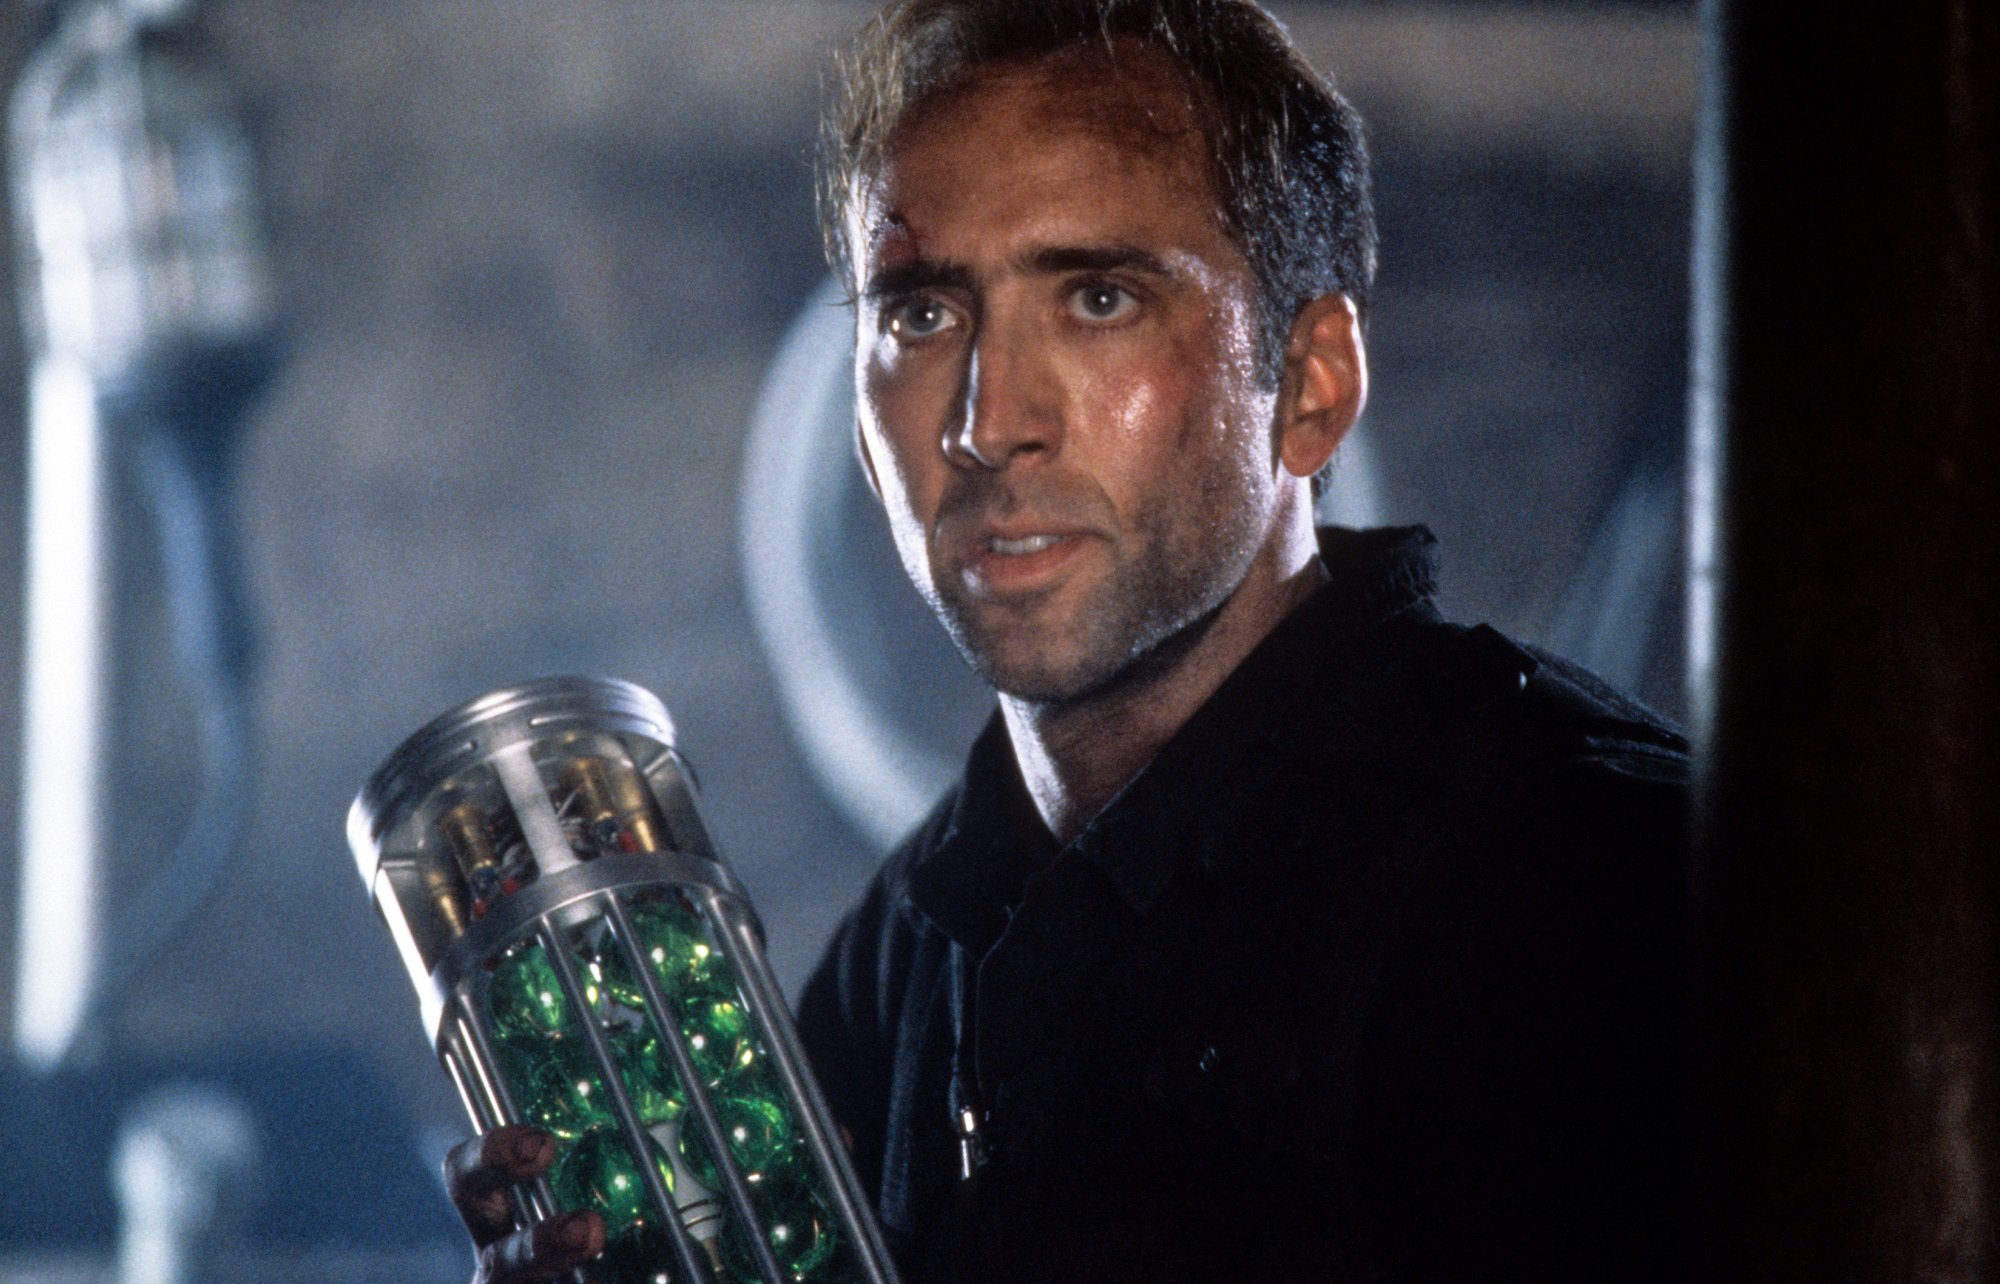 Nicolas Cage holds the rocket in The Rock